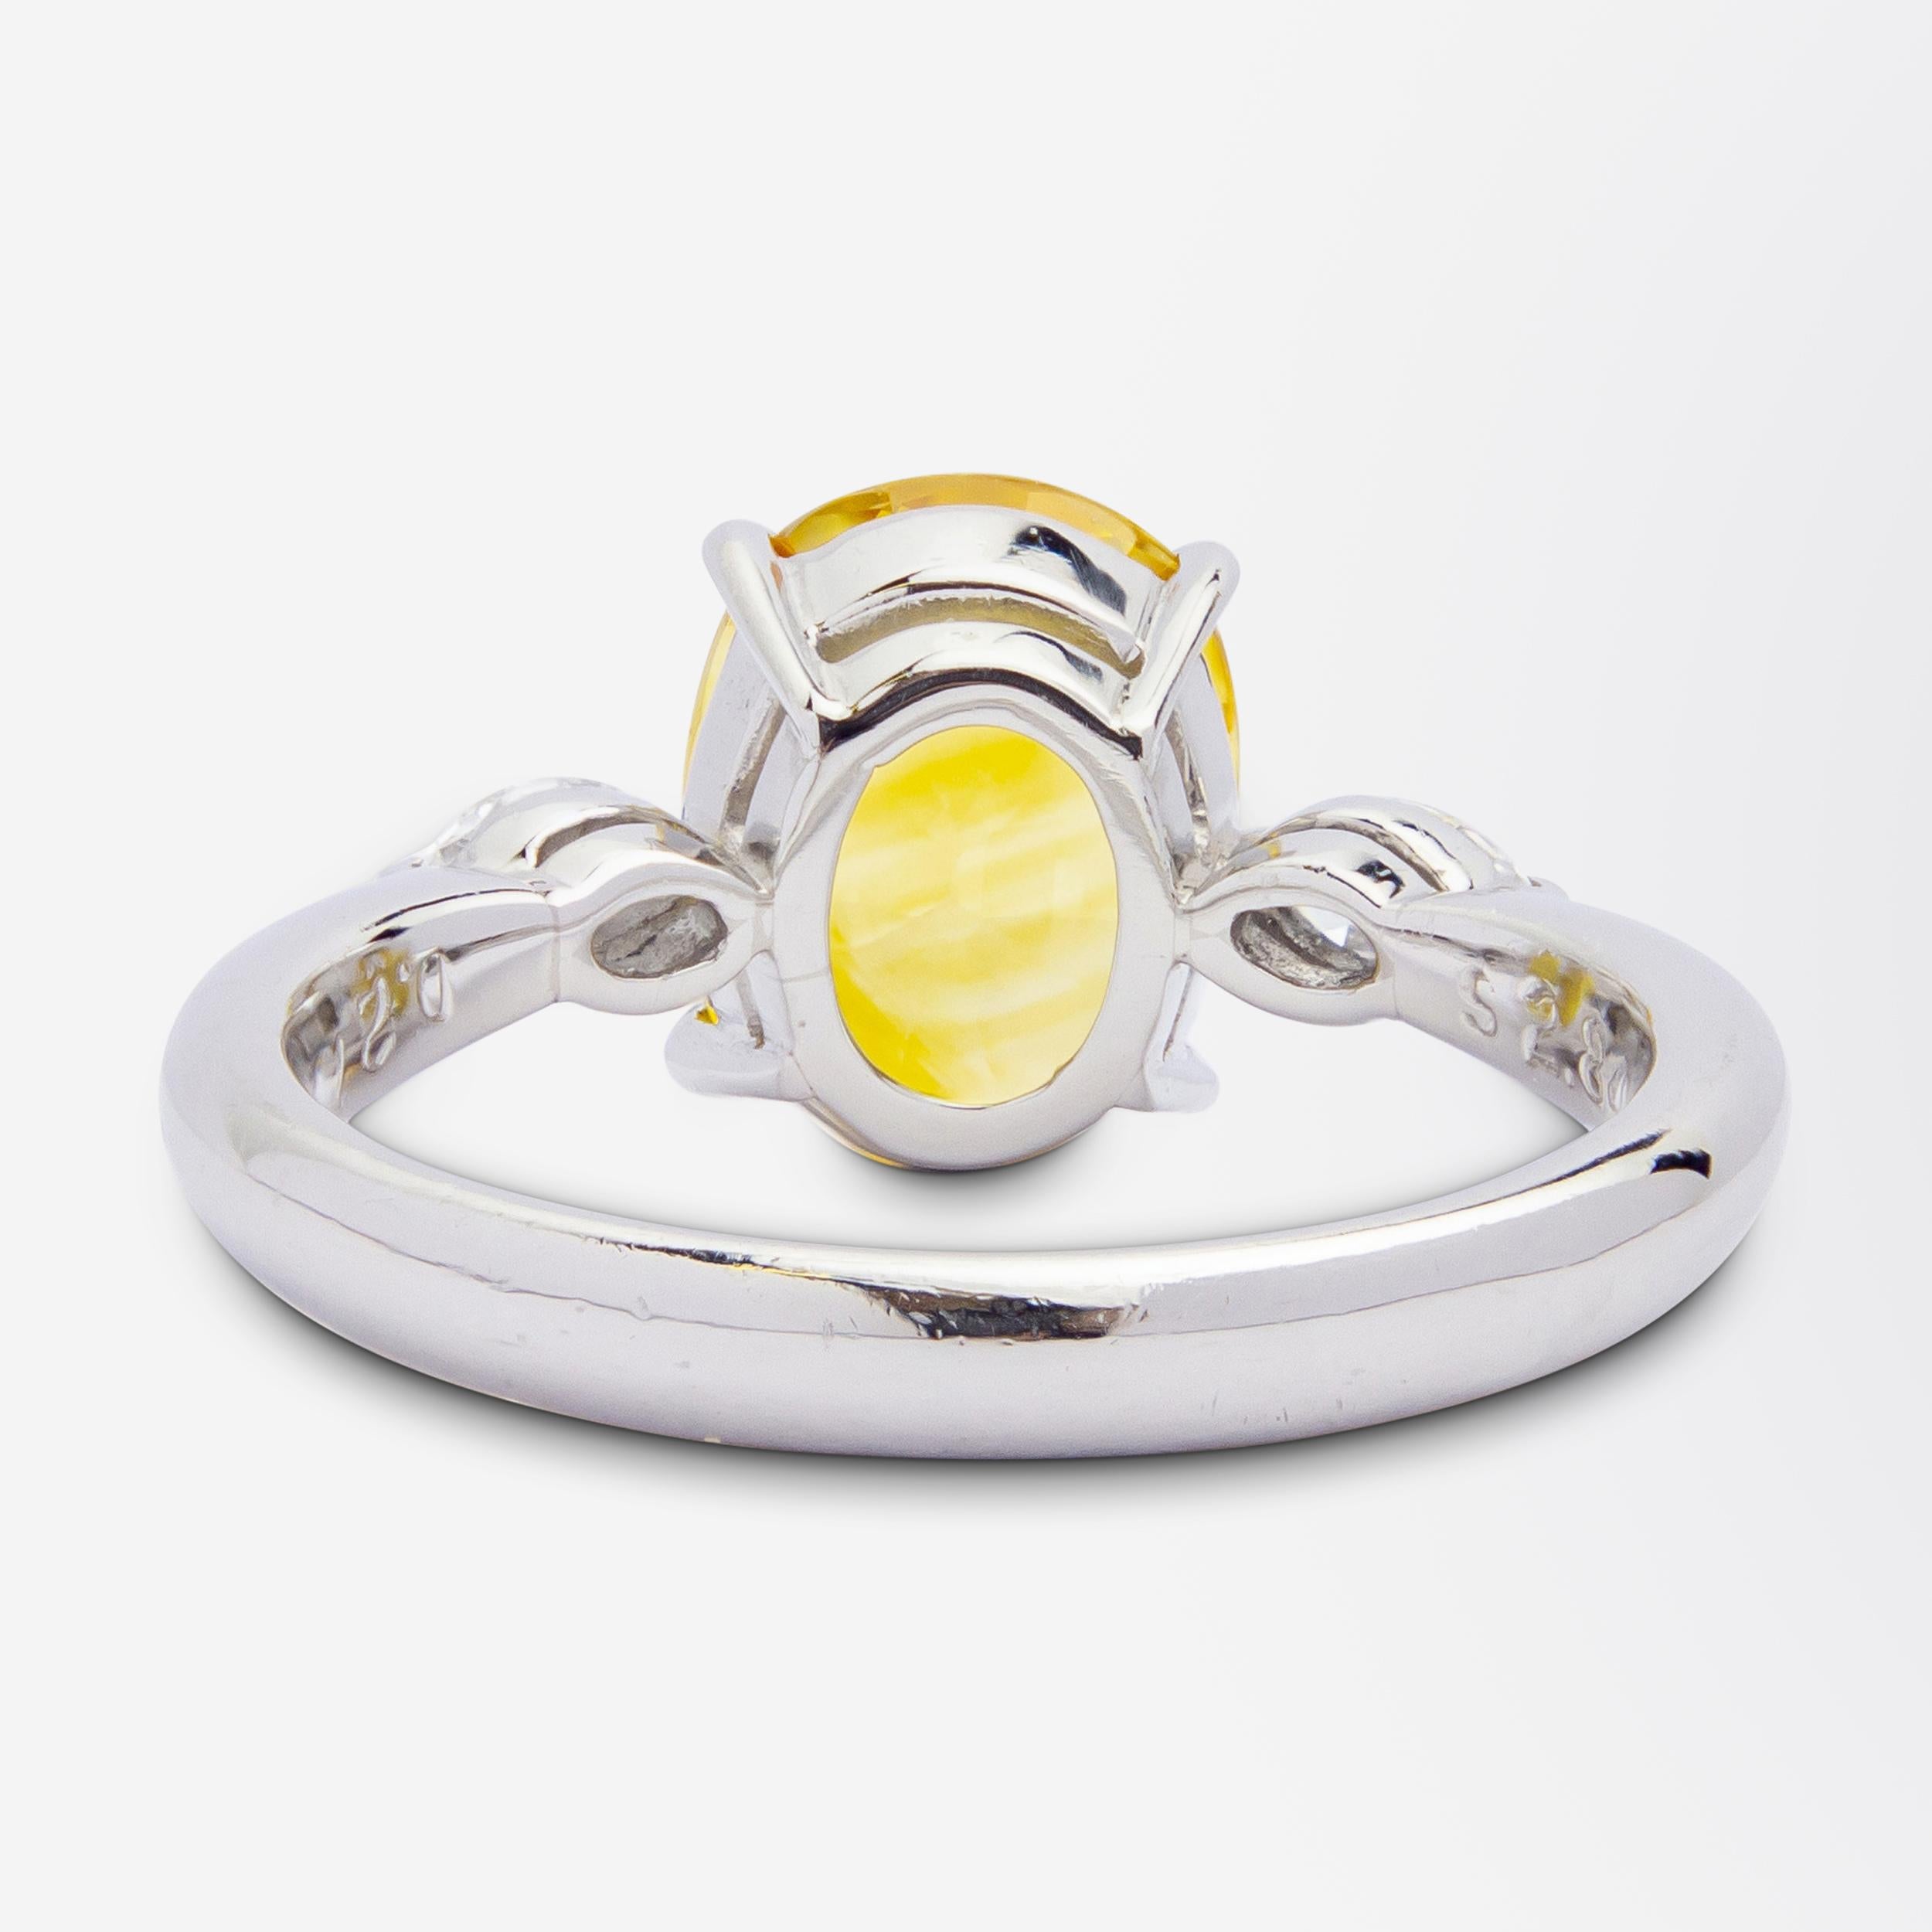 Platinum, Diamond & Yellow Sapphire Ring In Good Condition For Sale In Brisbane, QLD